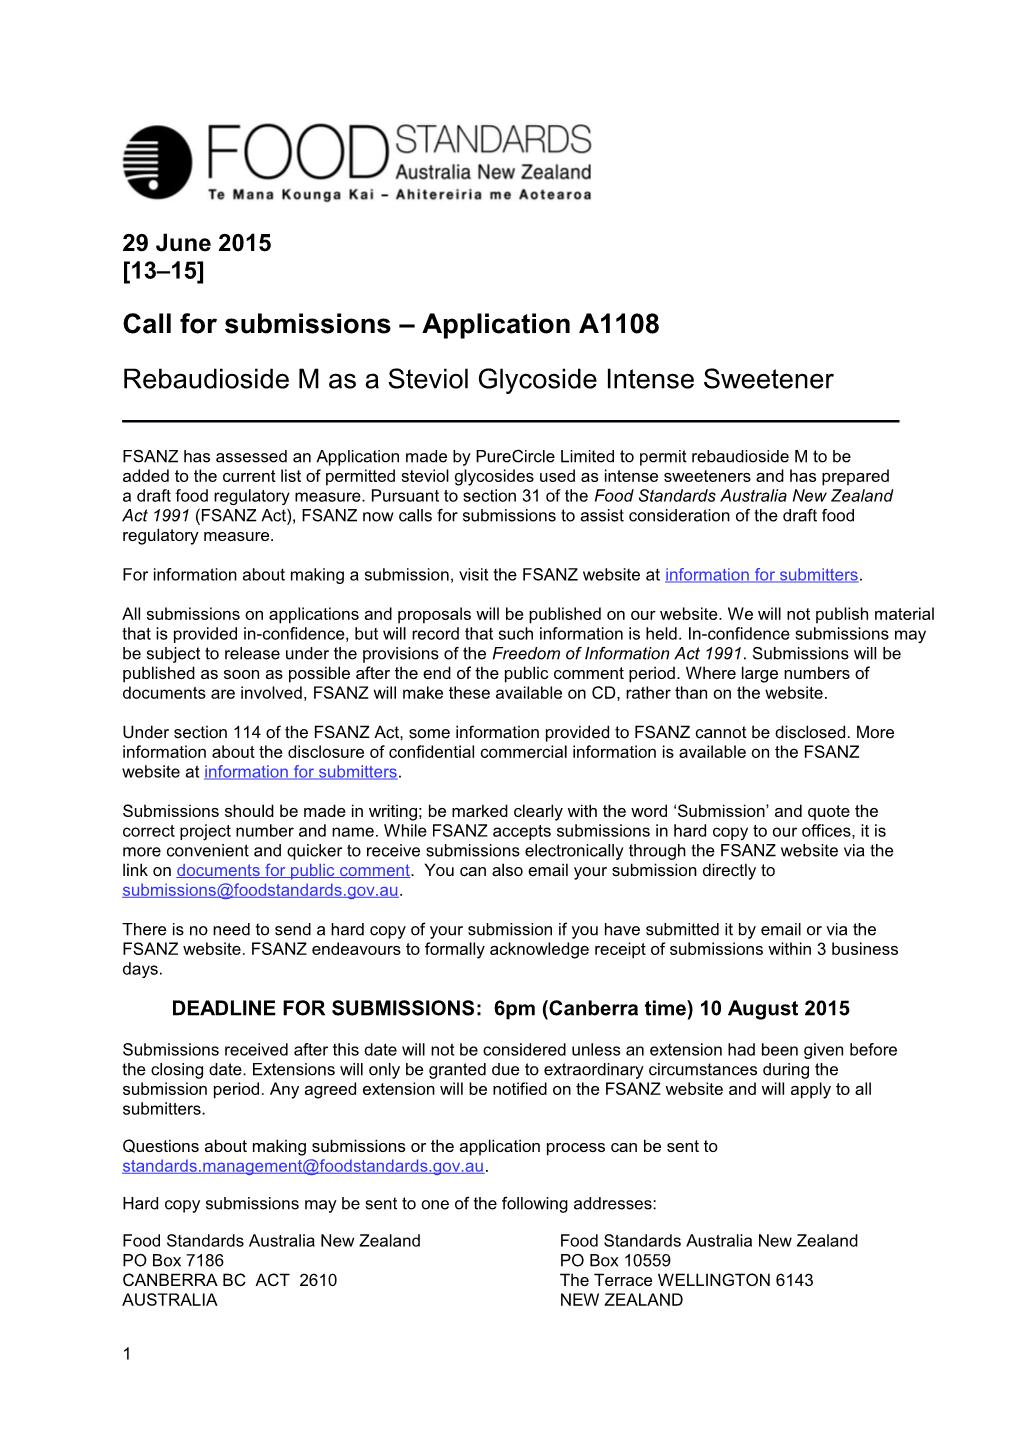 Callforsubmissions Application A1108